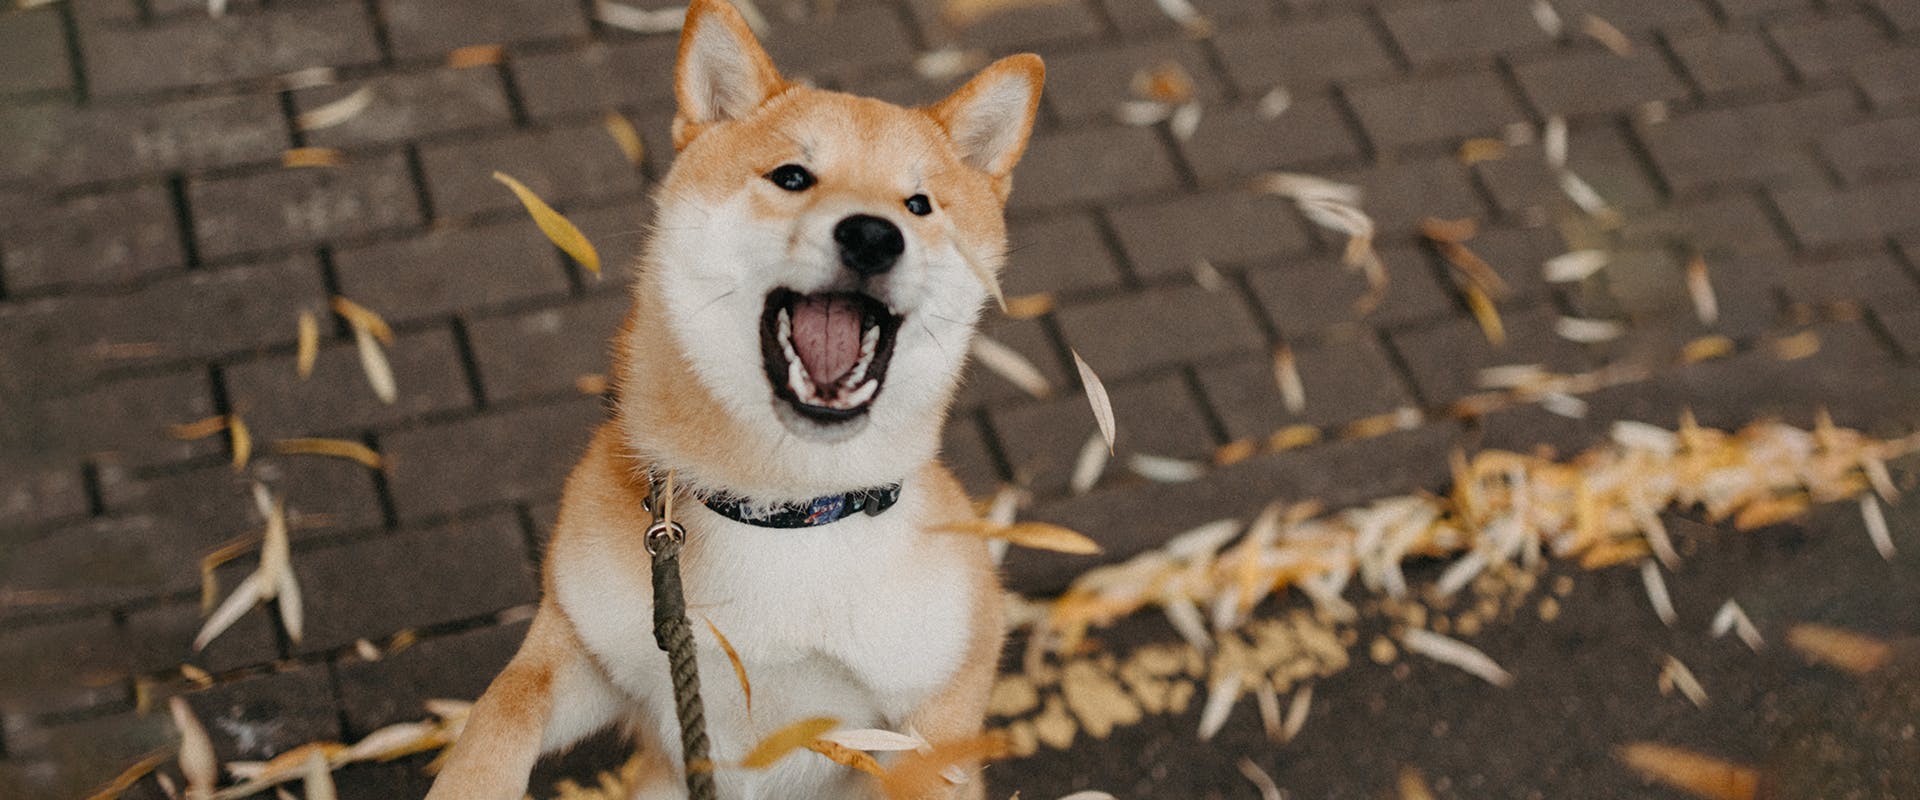 An excited Shiba Inu with the zoomies